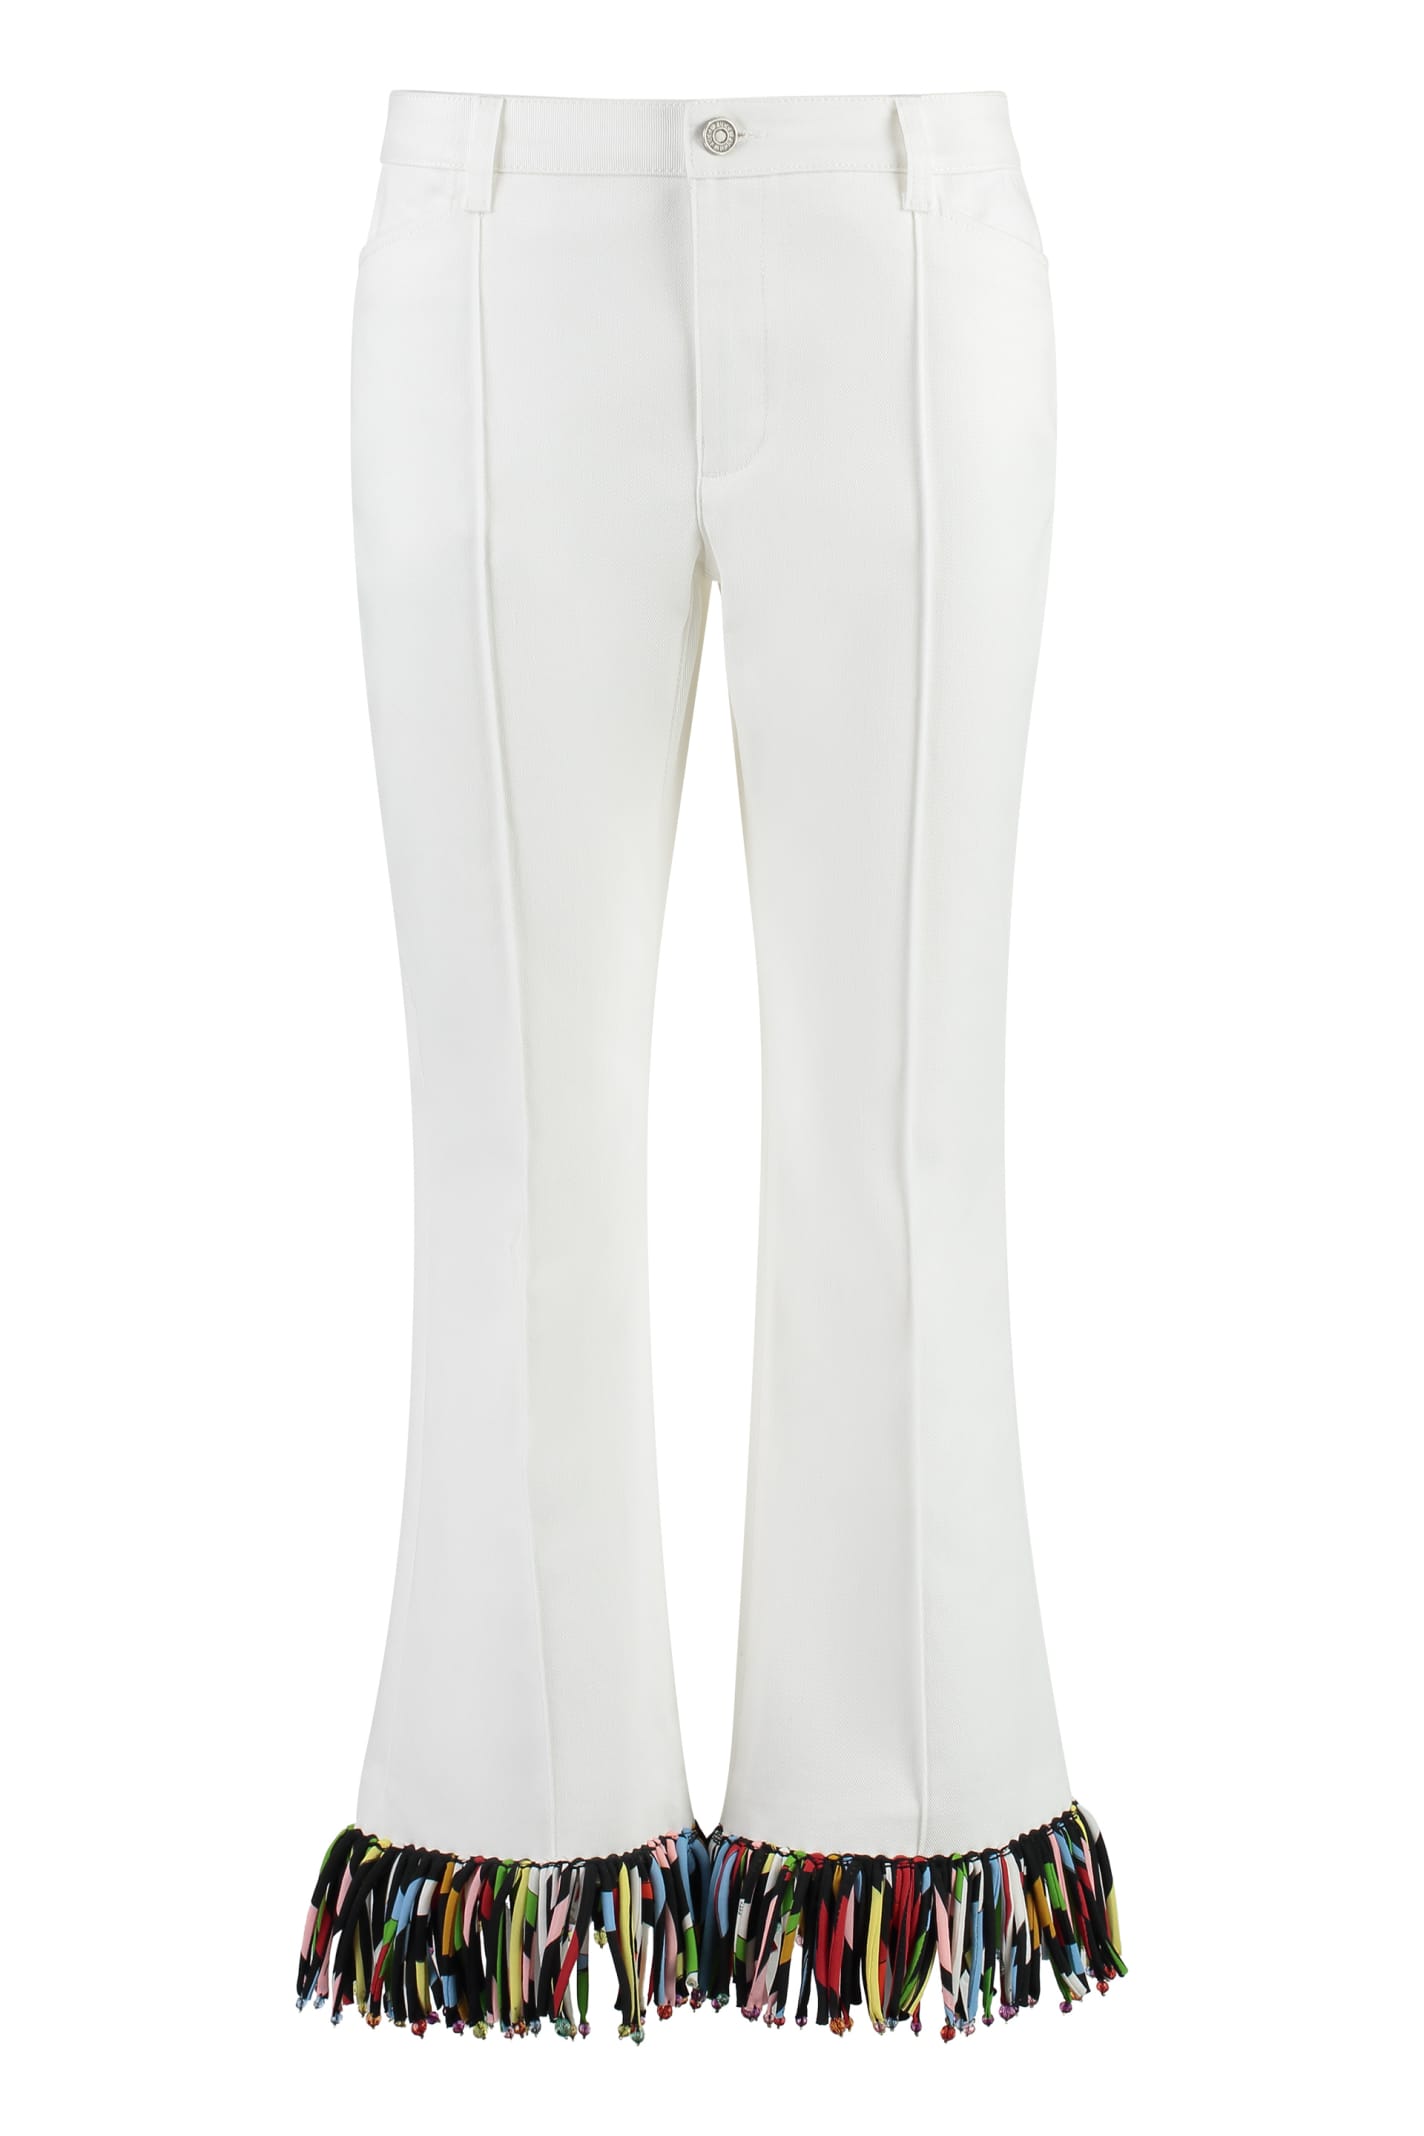 Shop Emilio Pucci Cropped Flared Trousers In White